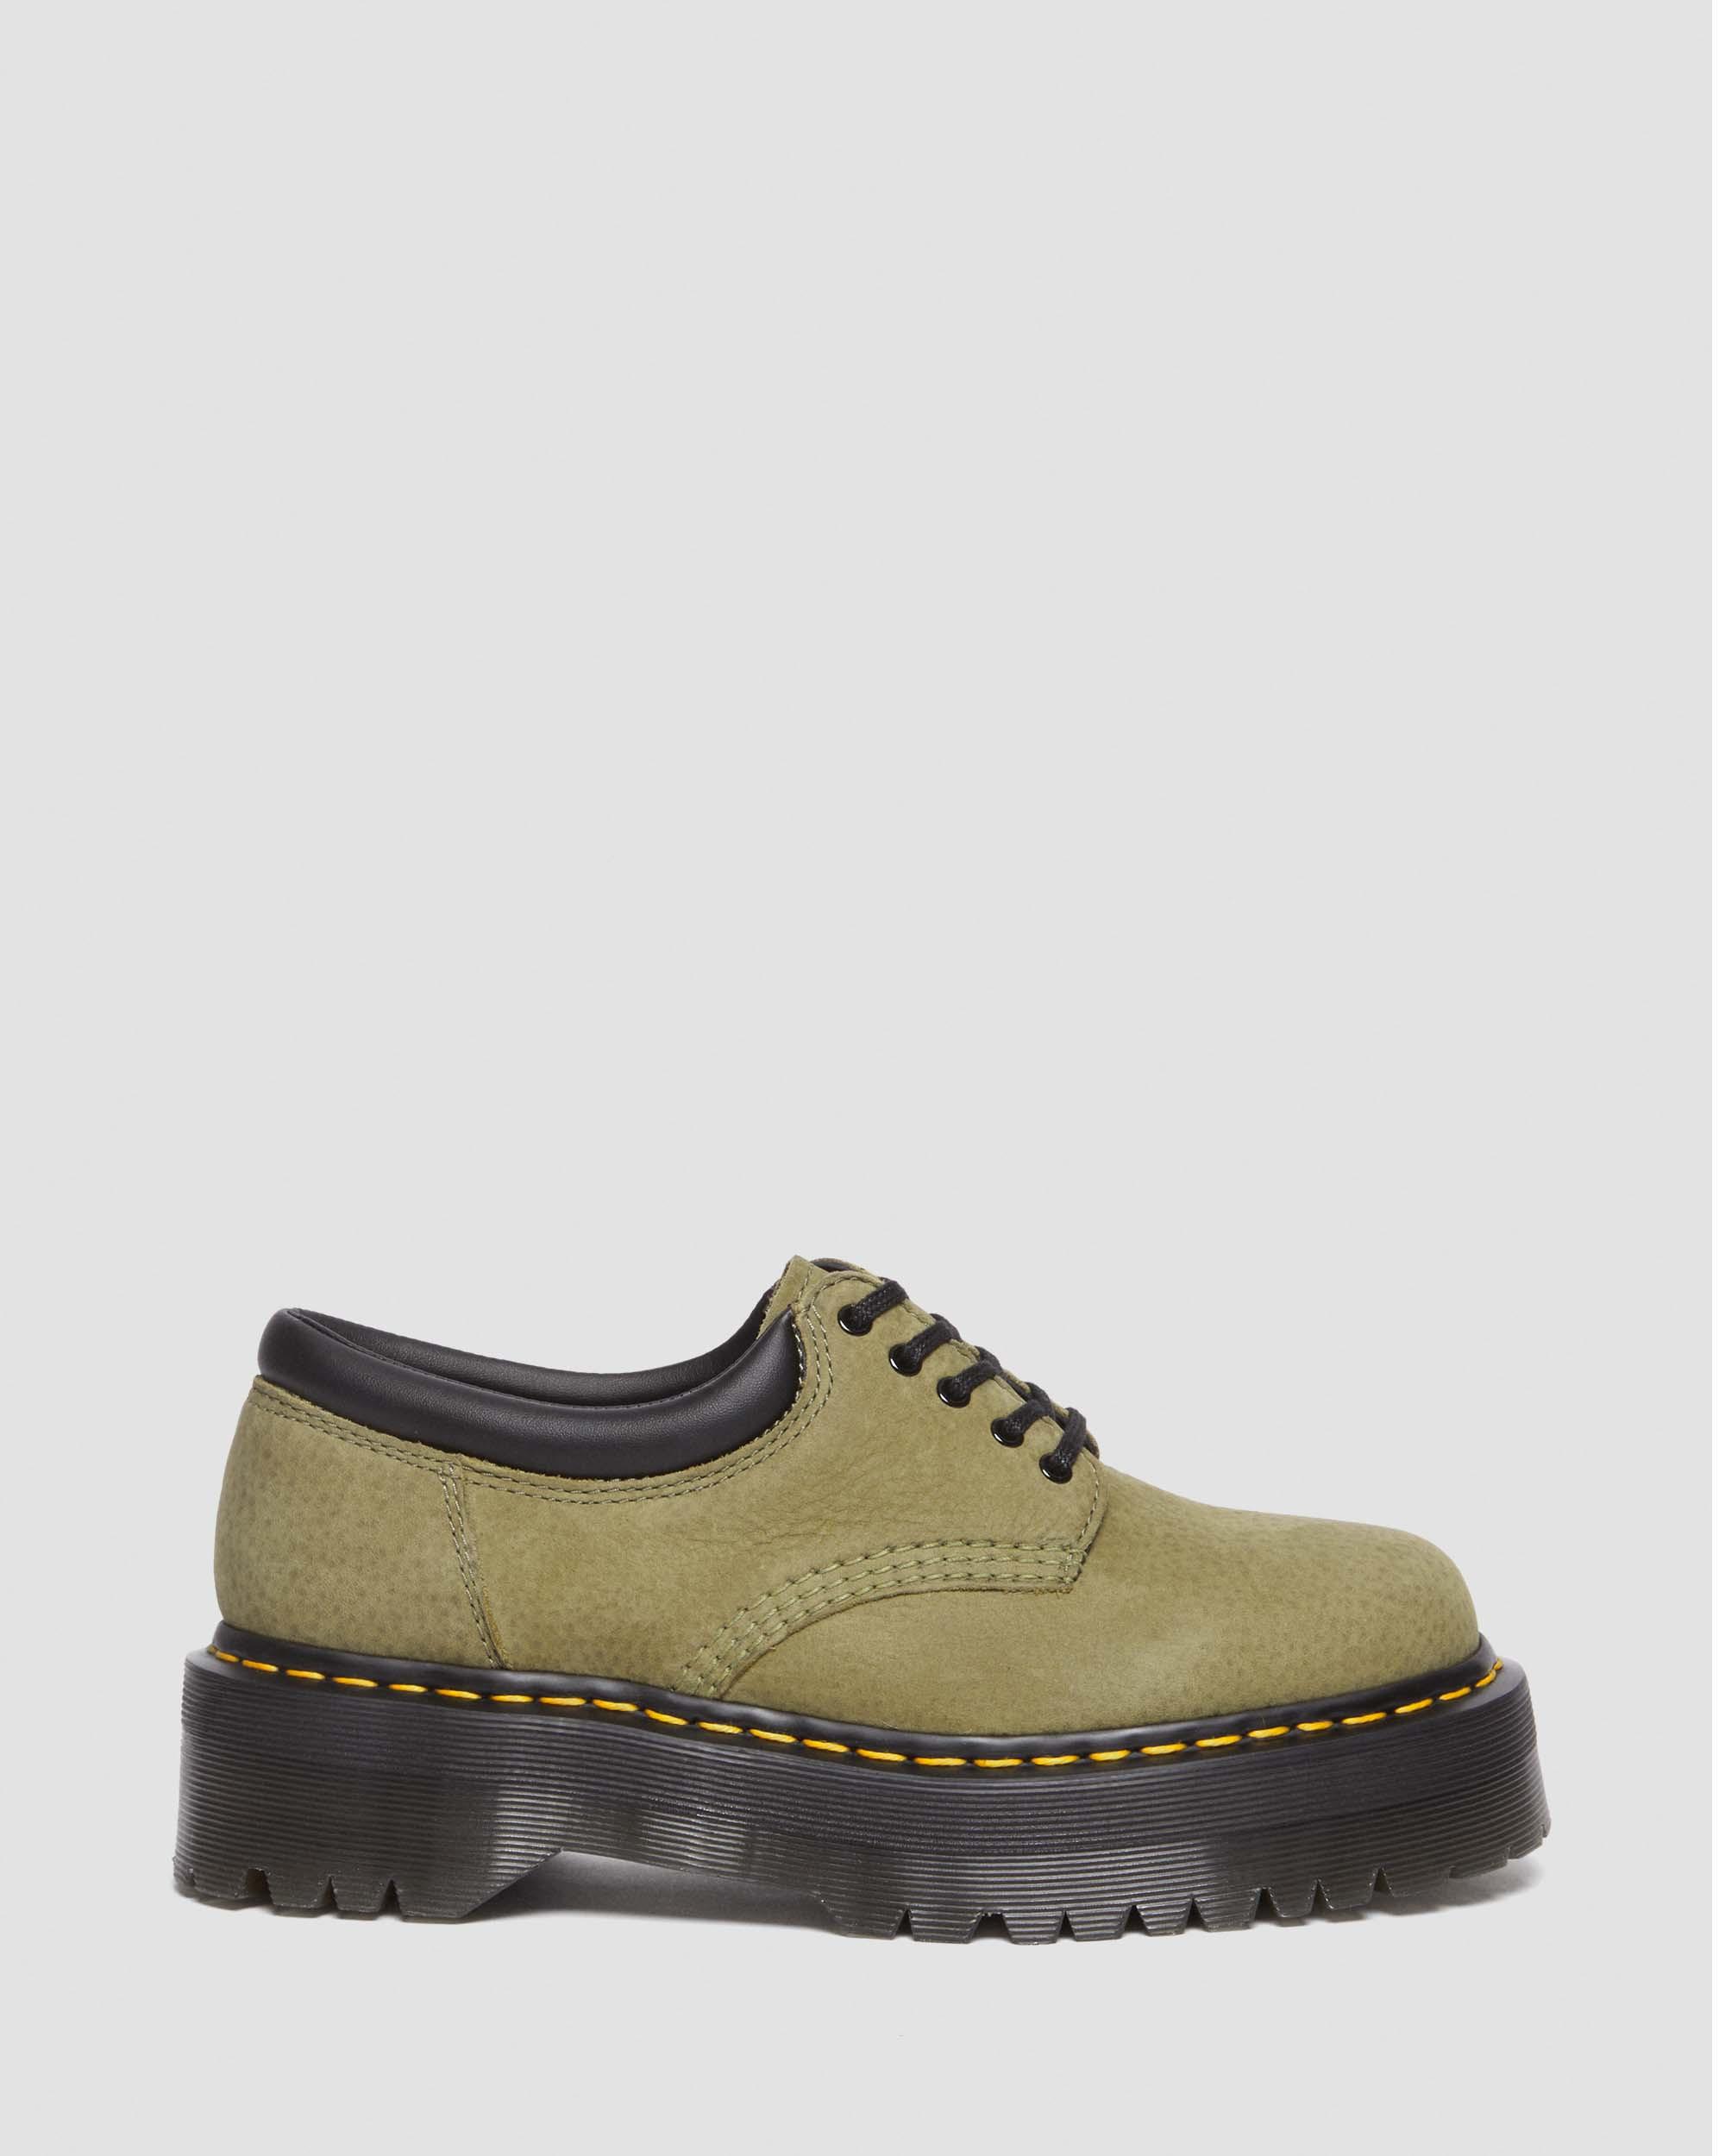 8053 Tumbled Nubuck Leather Platform Shoes in Muted Olive